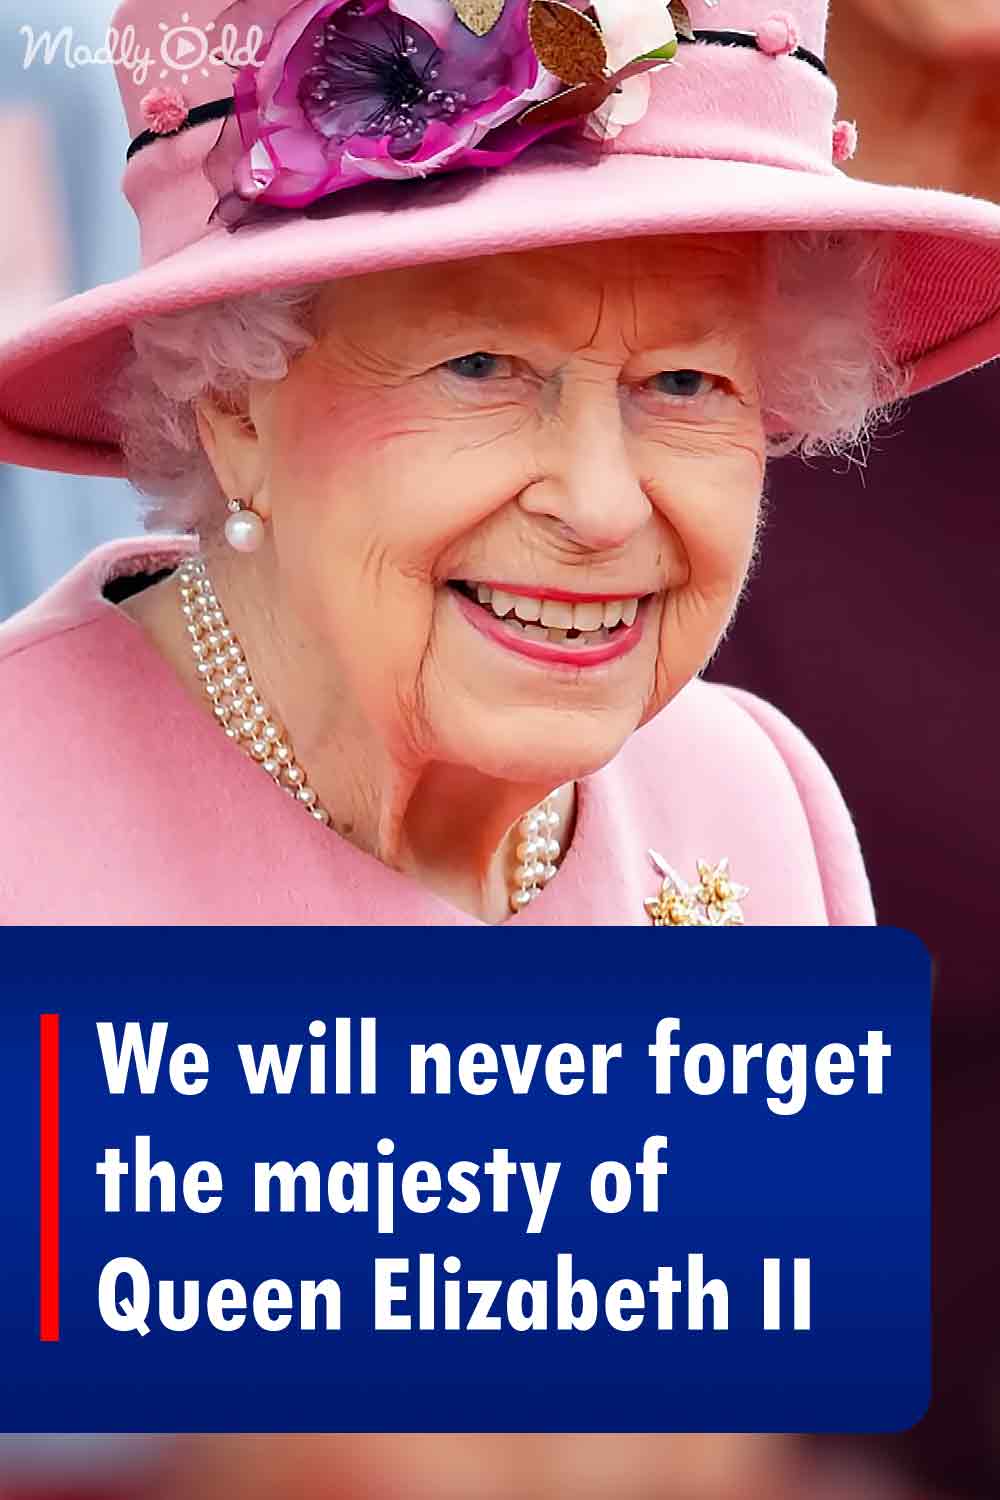 We will never forget the majesty of Queen Elizabeth II